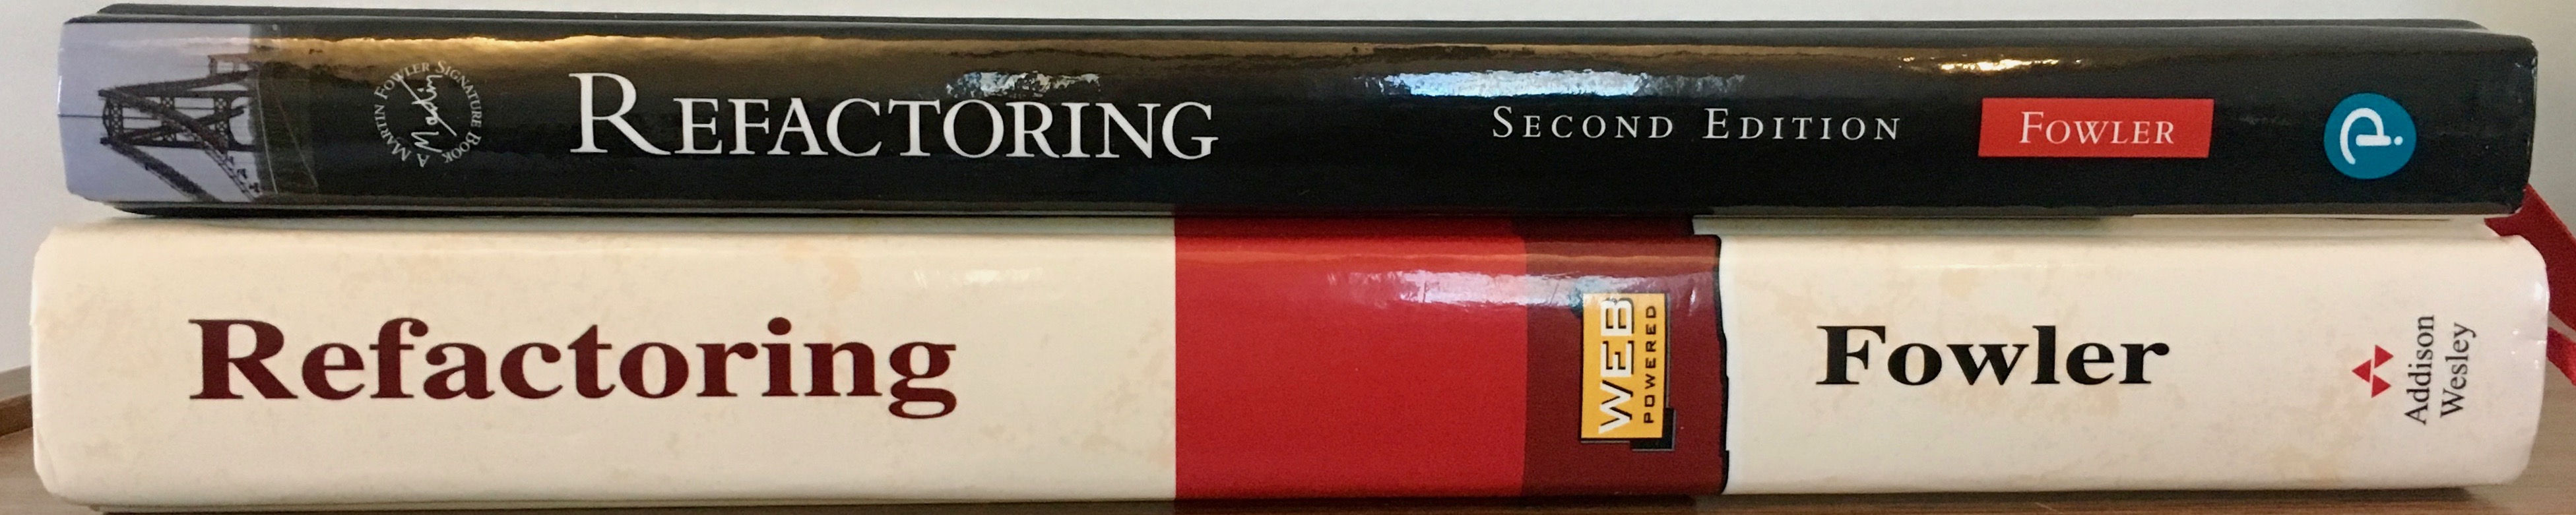 photo of first and second edition spines